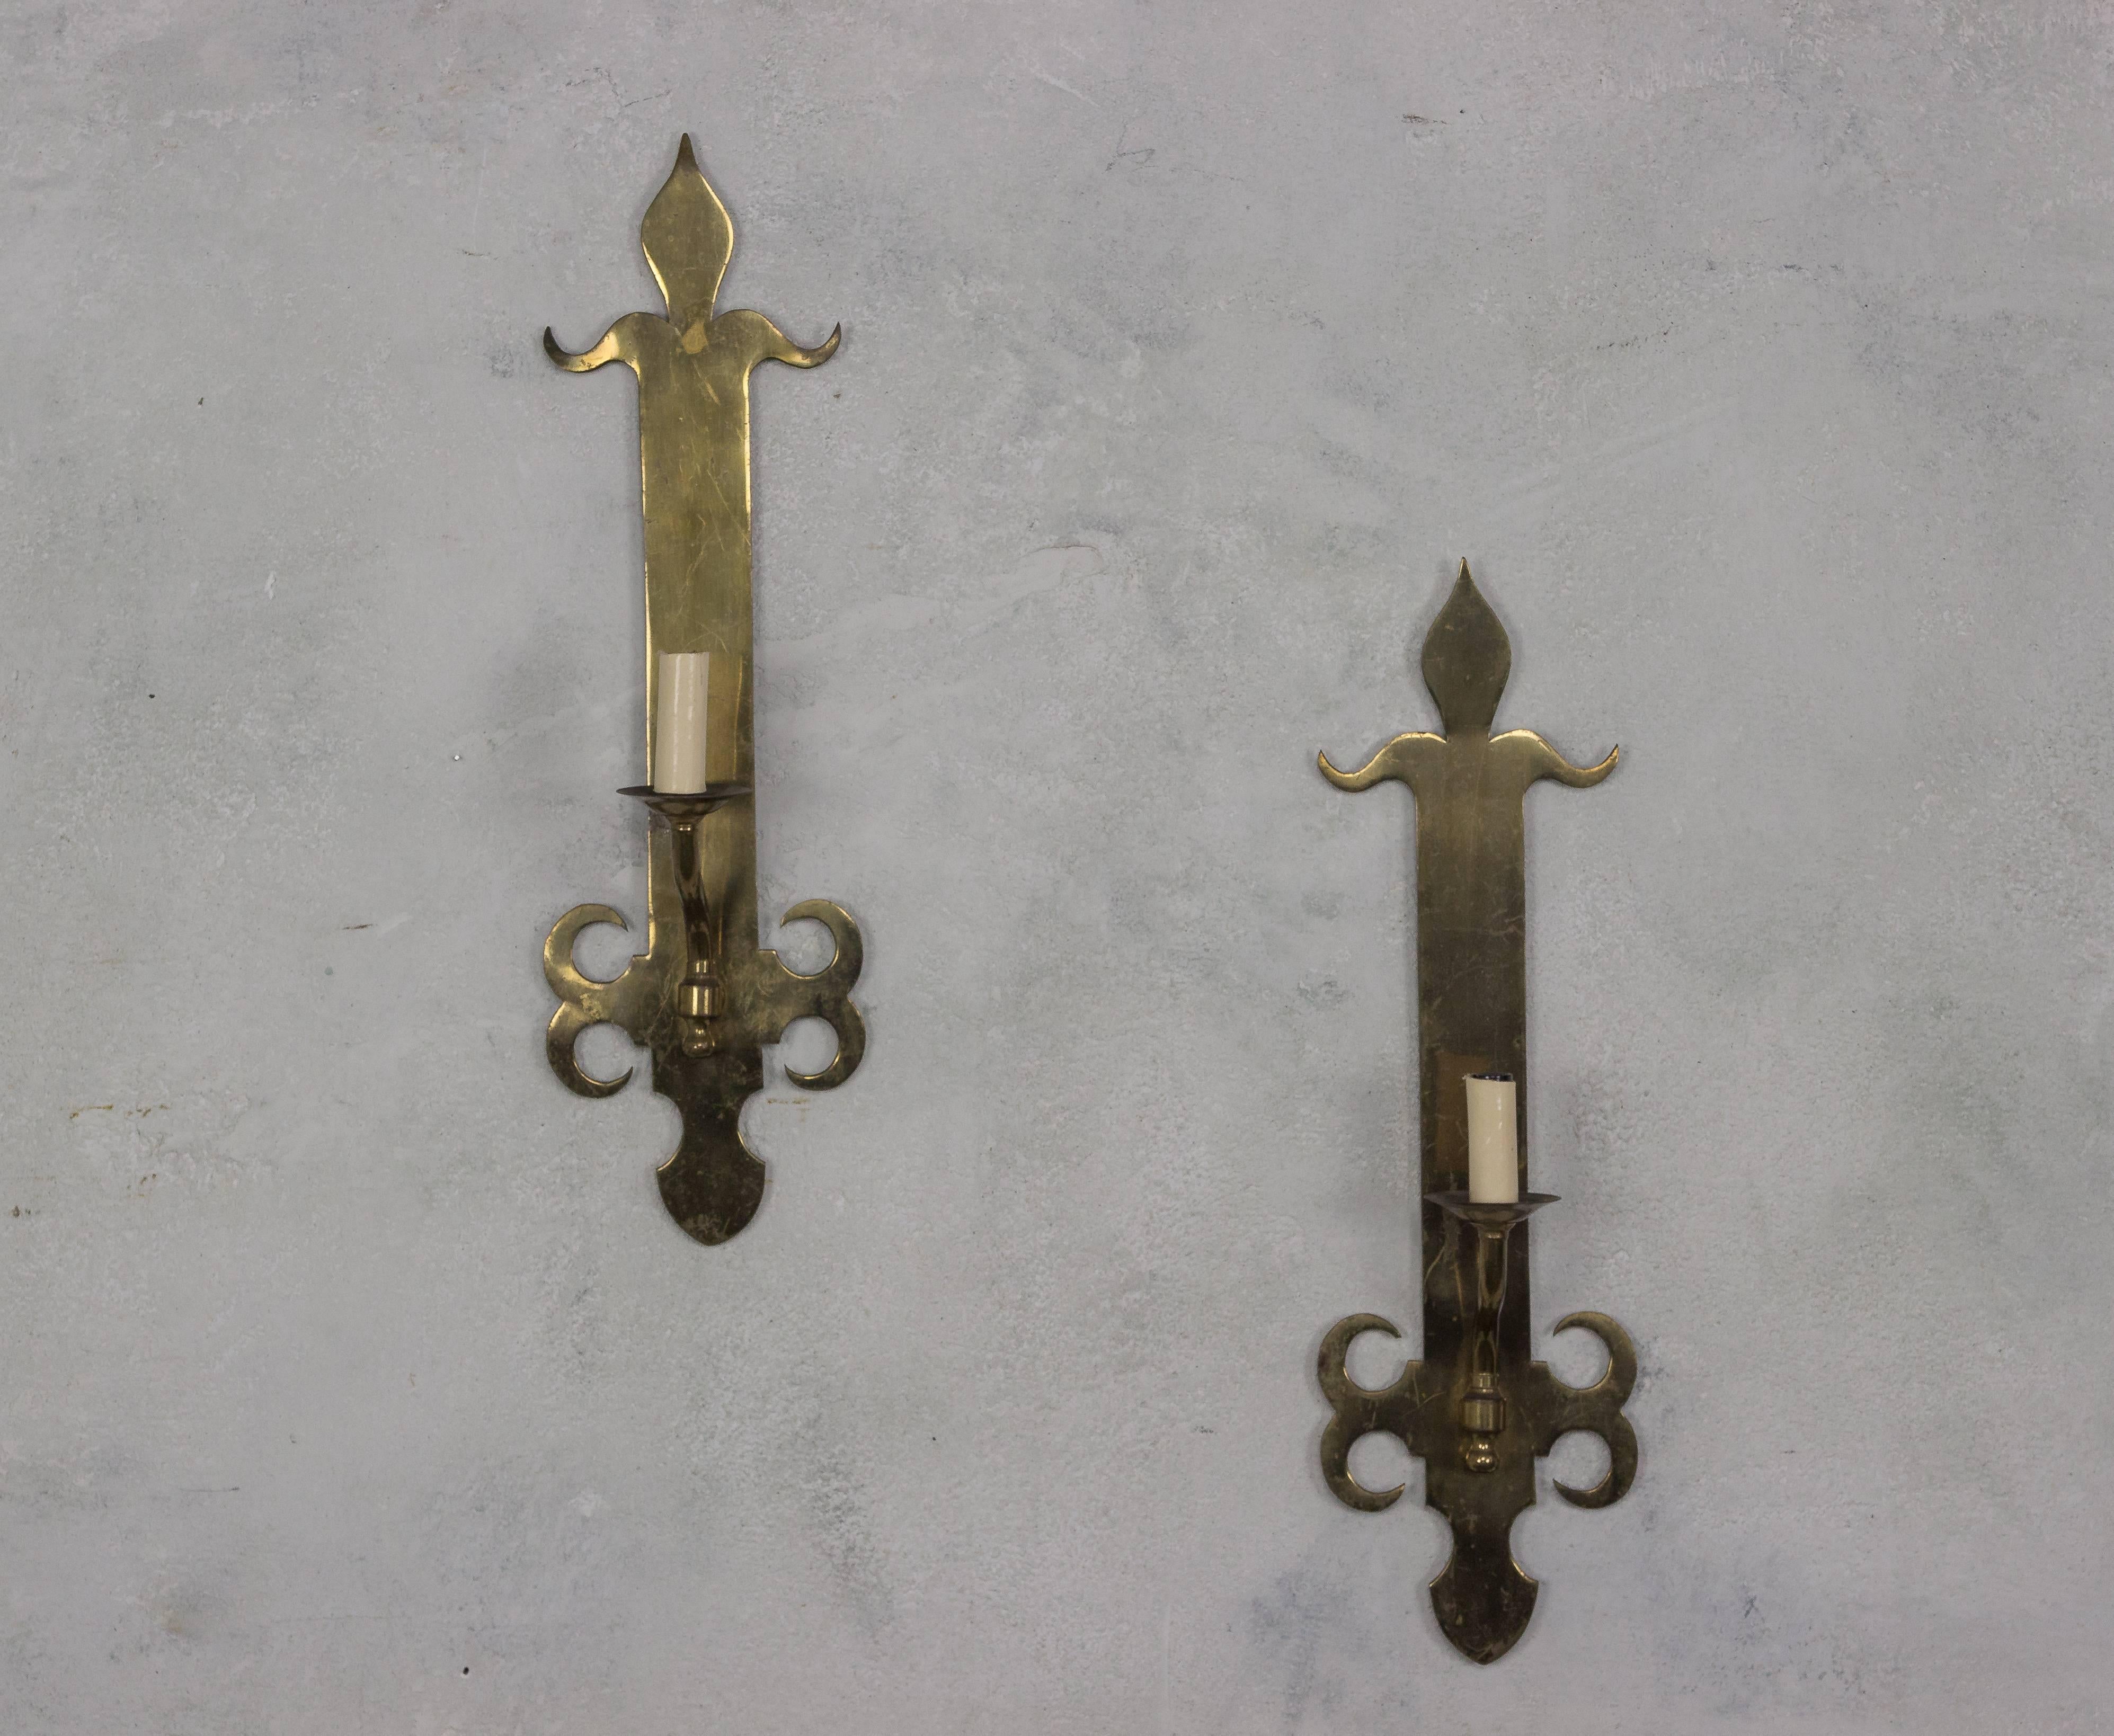 This pair of single-armed sconces, originating from France in the 1950s, is finished in English brass, lending them a timeless appeal. They are currently wired for showroom display and do not meet UL Code standards, but can be rewired to UL